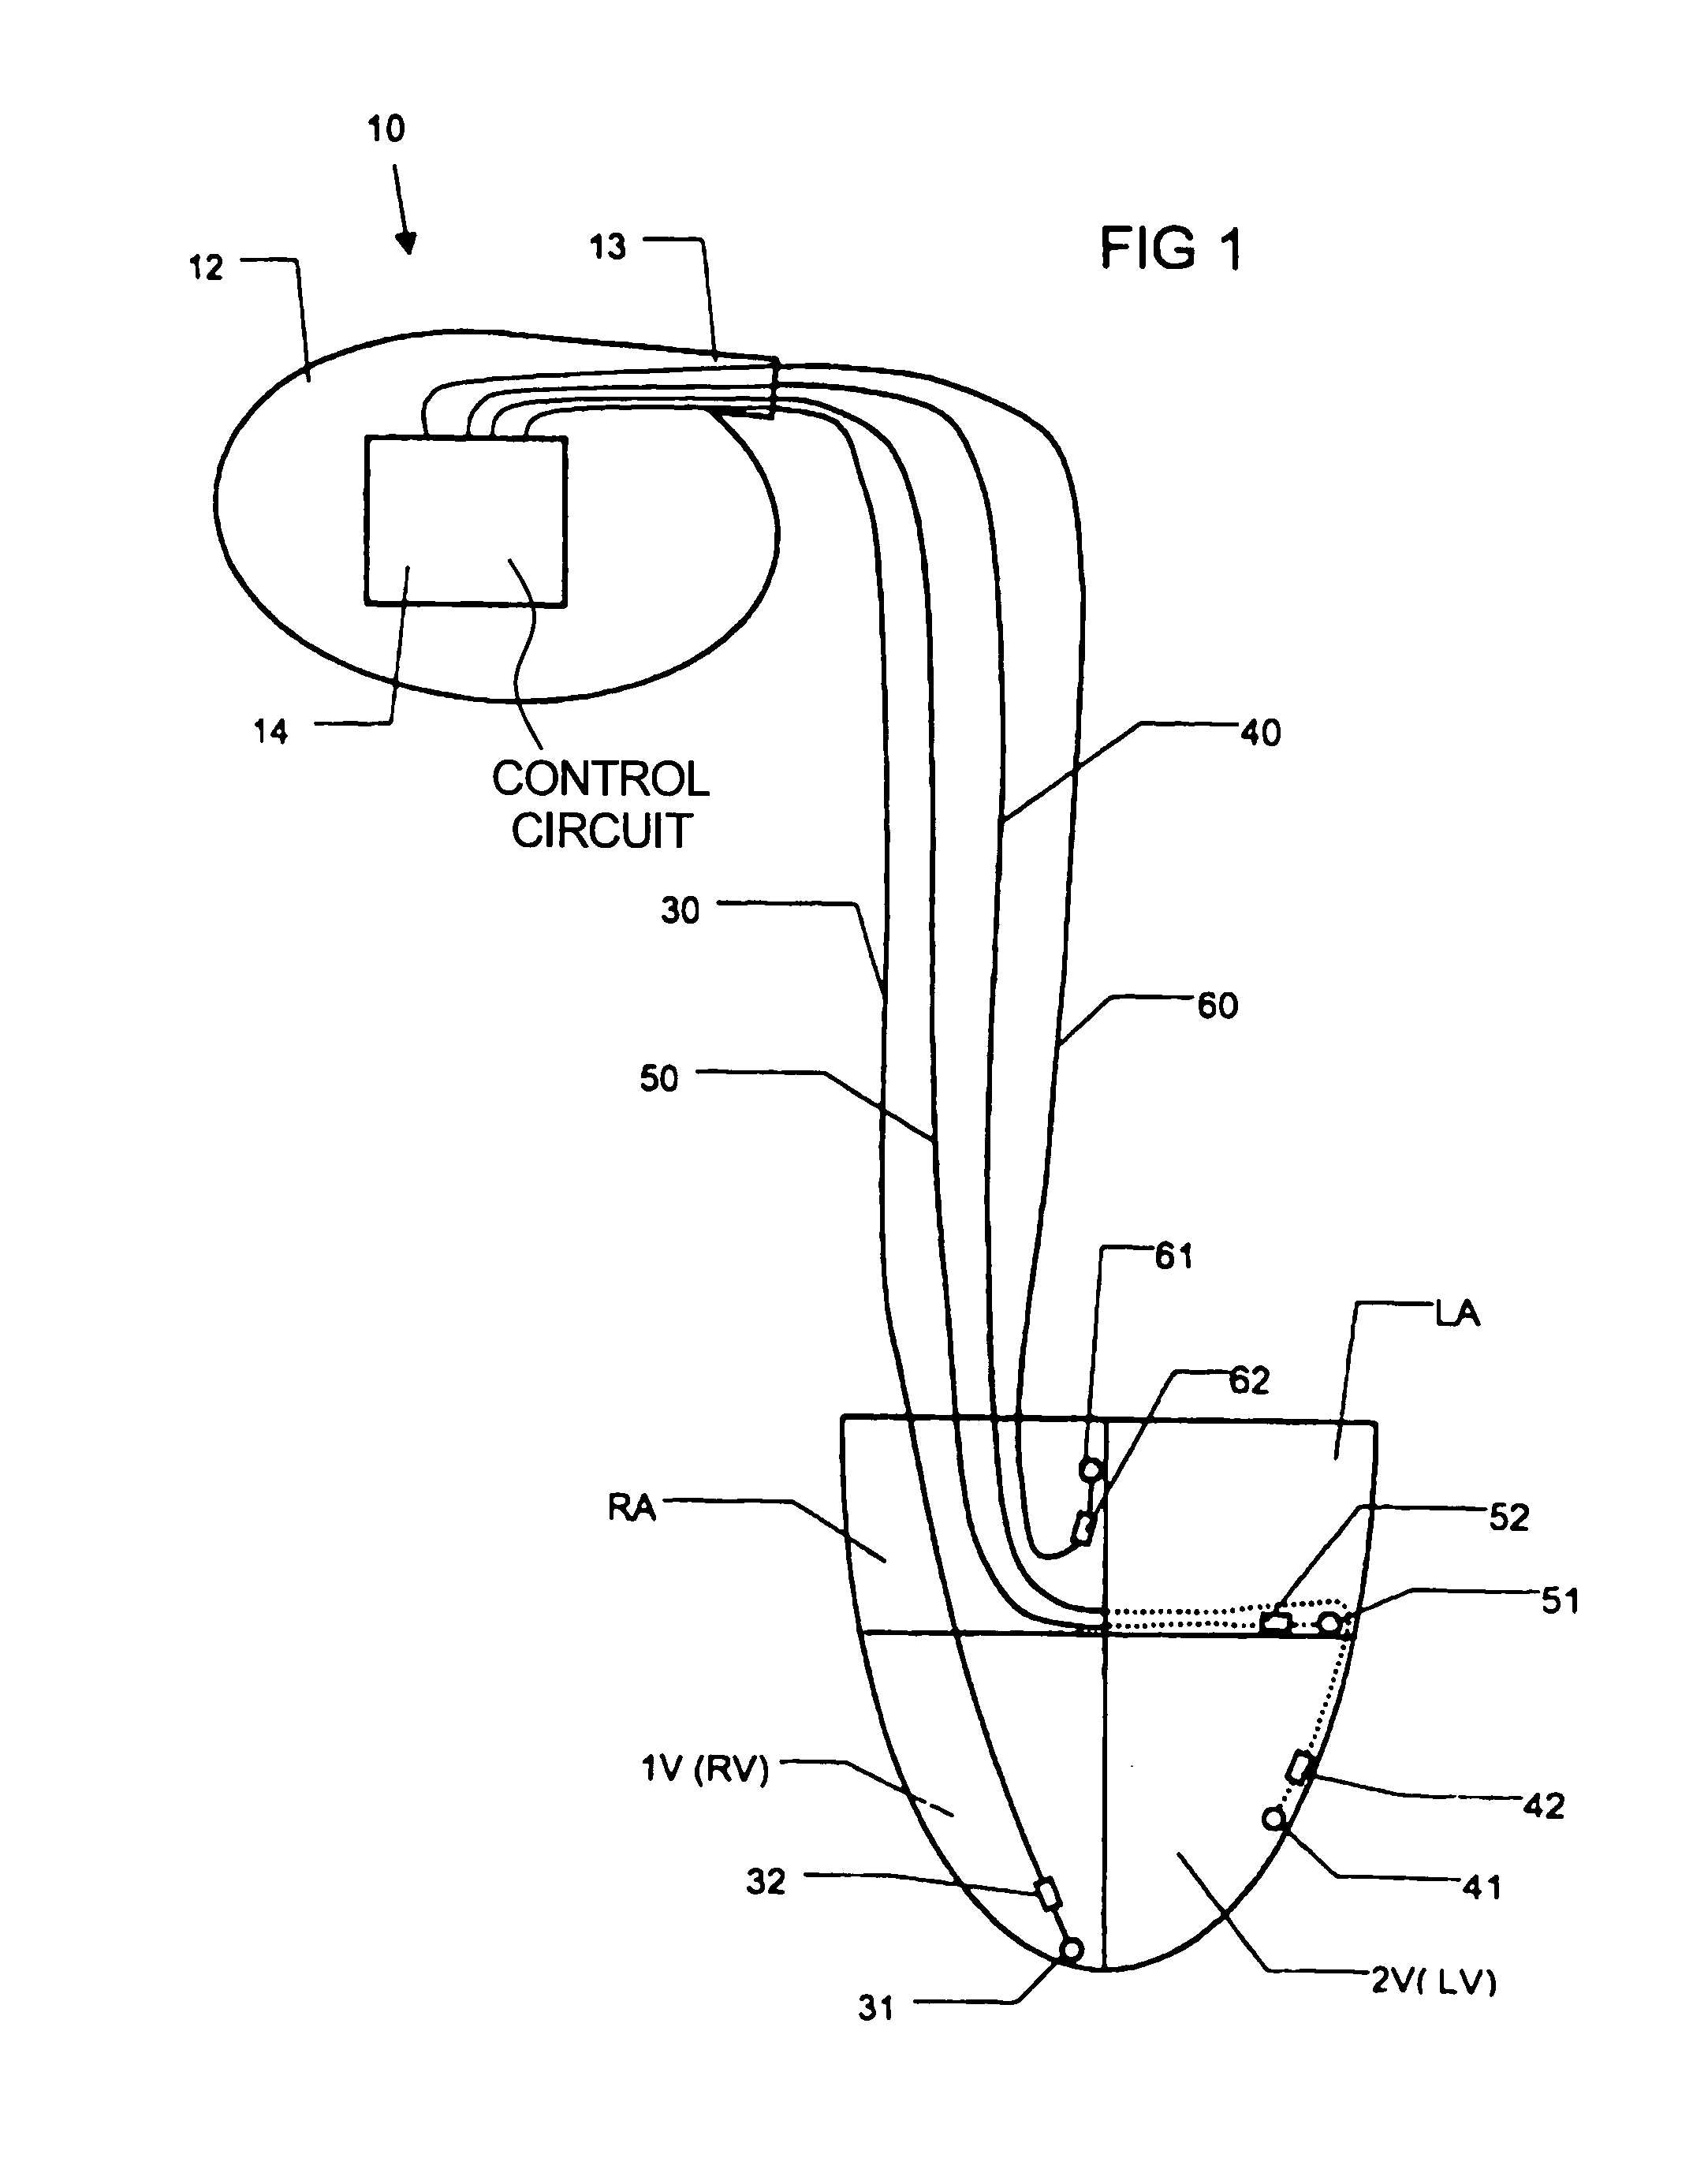 Implantable heart stimulating device, system and method